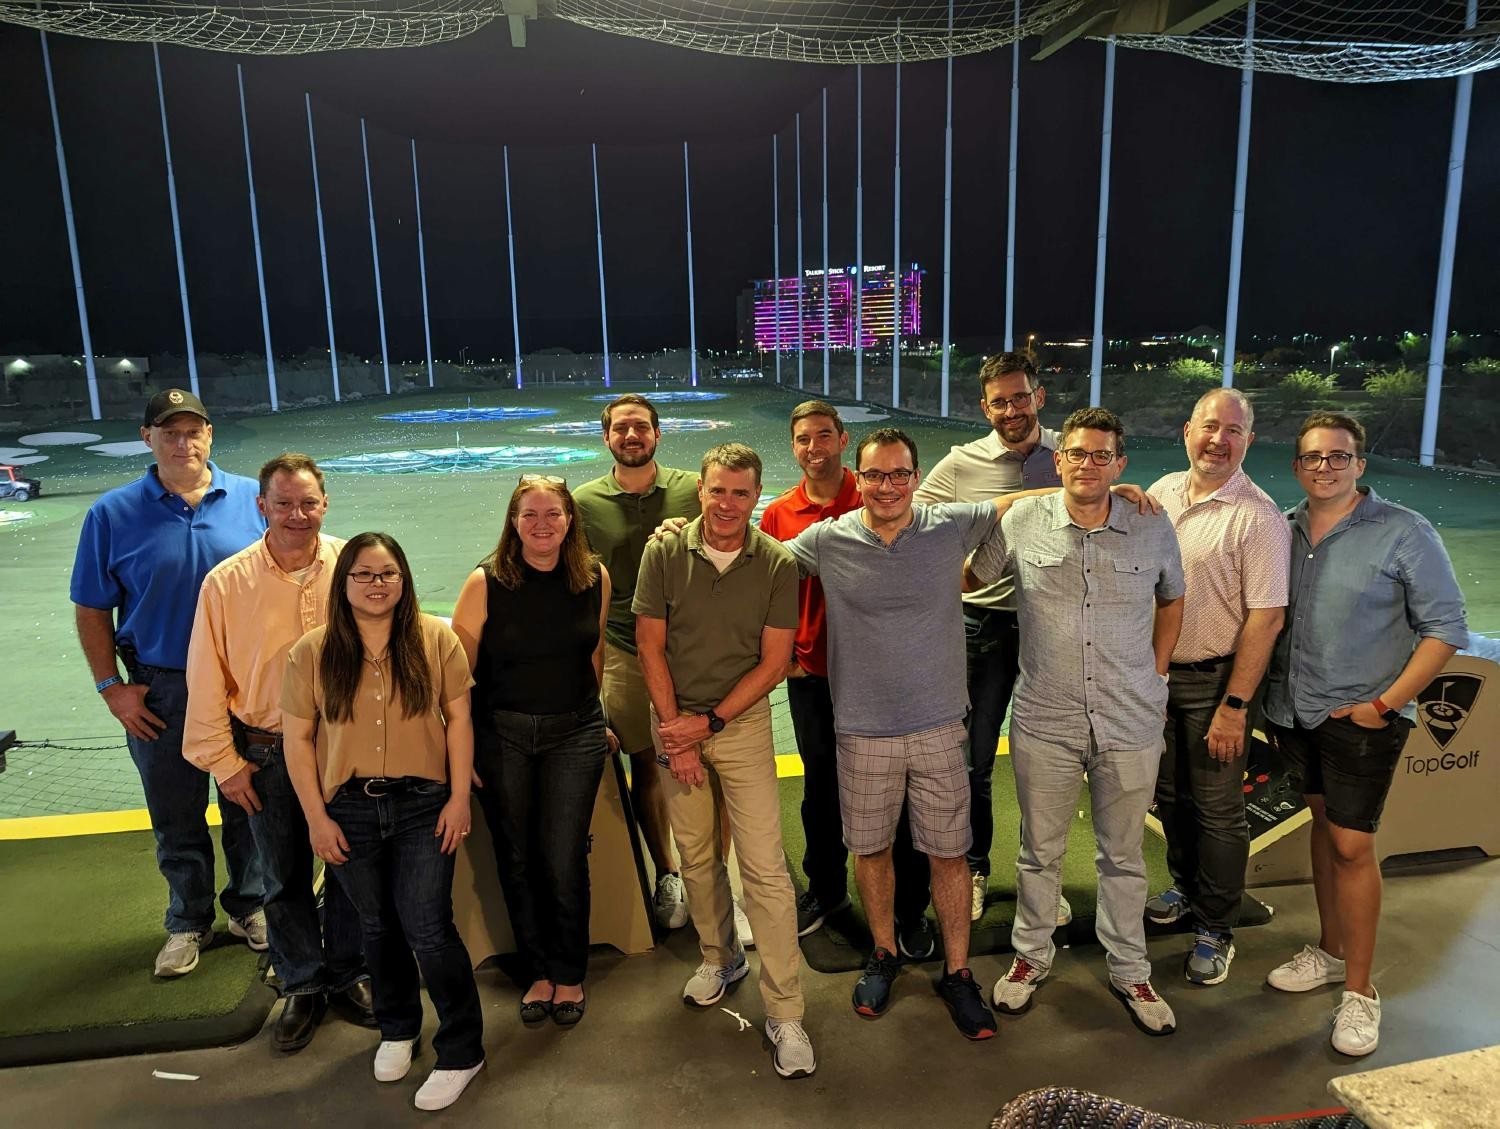 Enjoying downtime at Top Golf after a 3 day deep dive on improving the deployment experience for one of our customers.